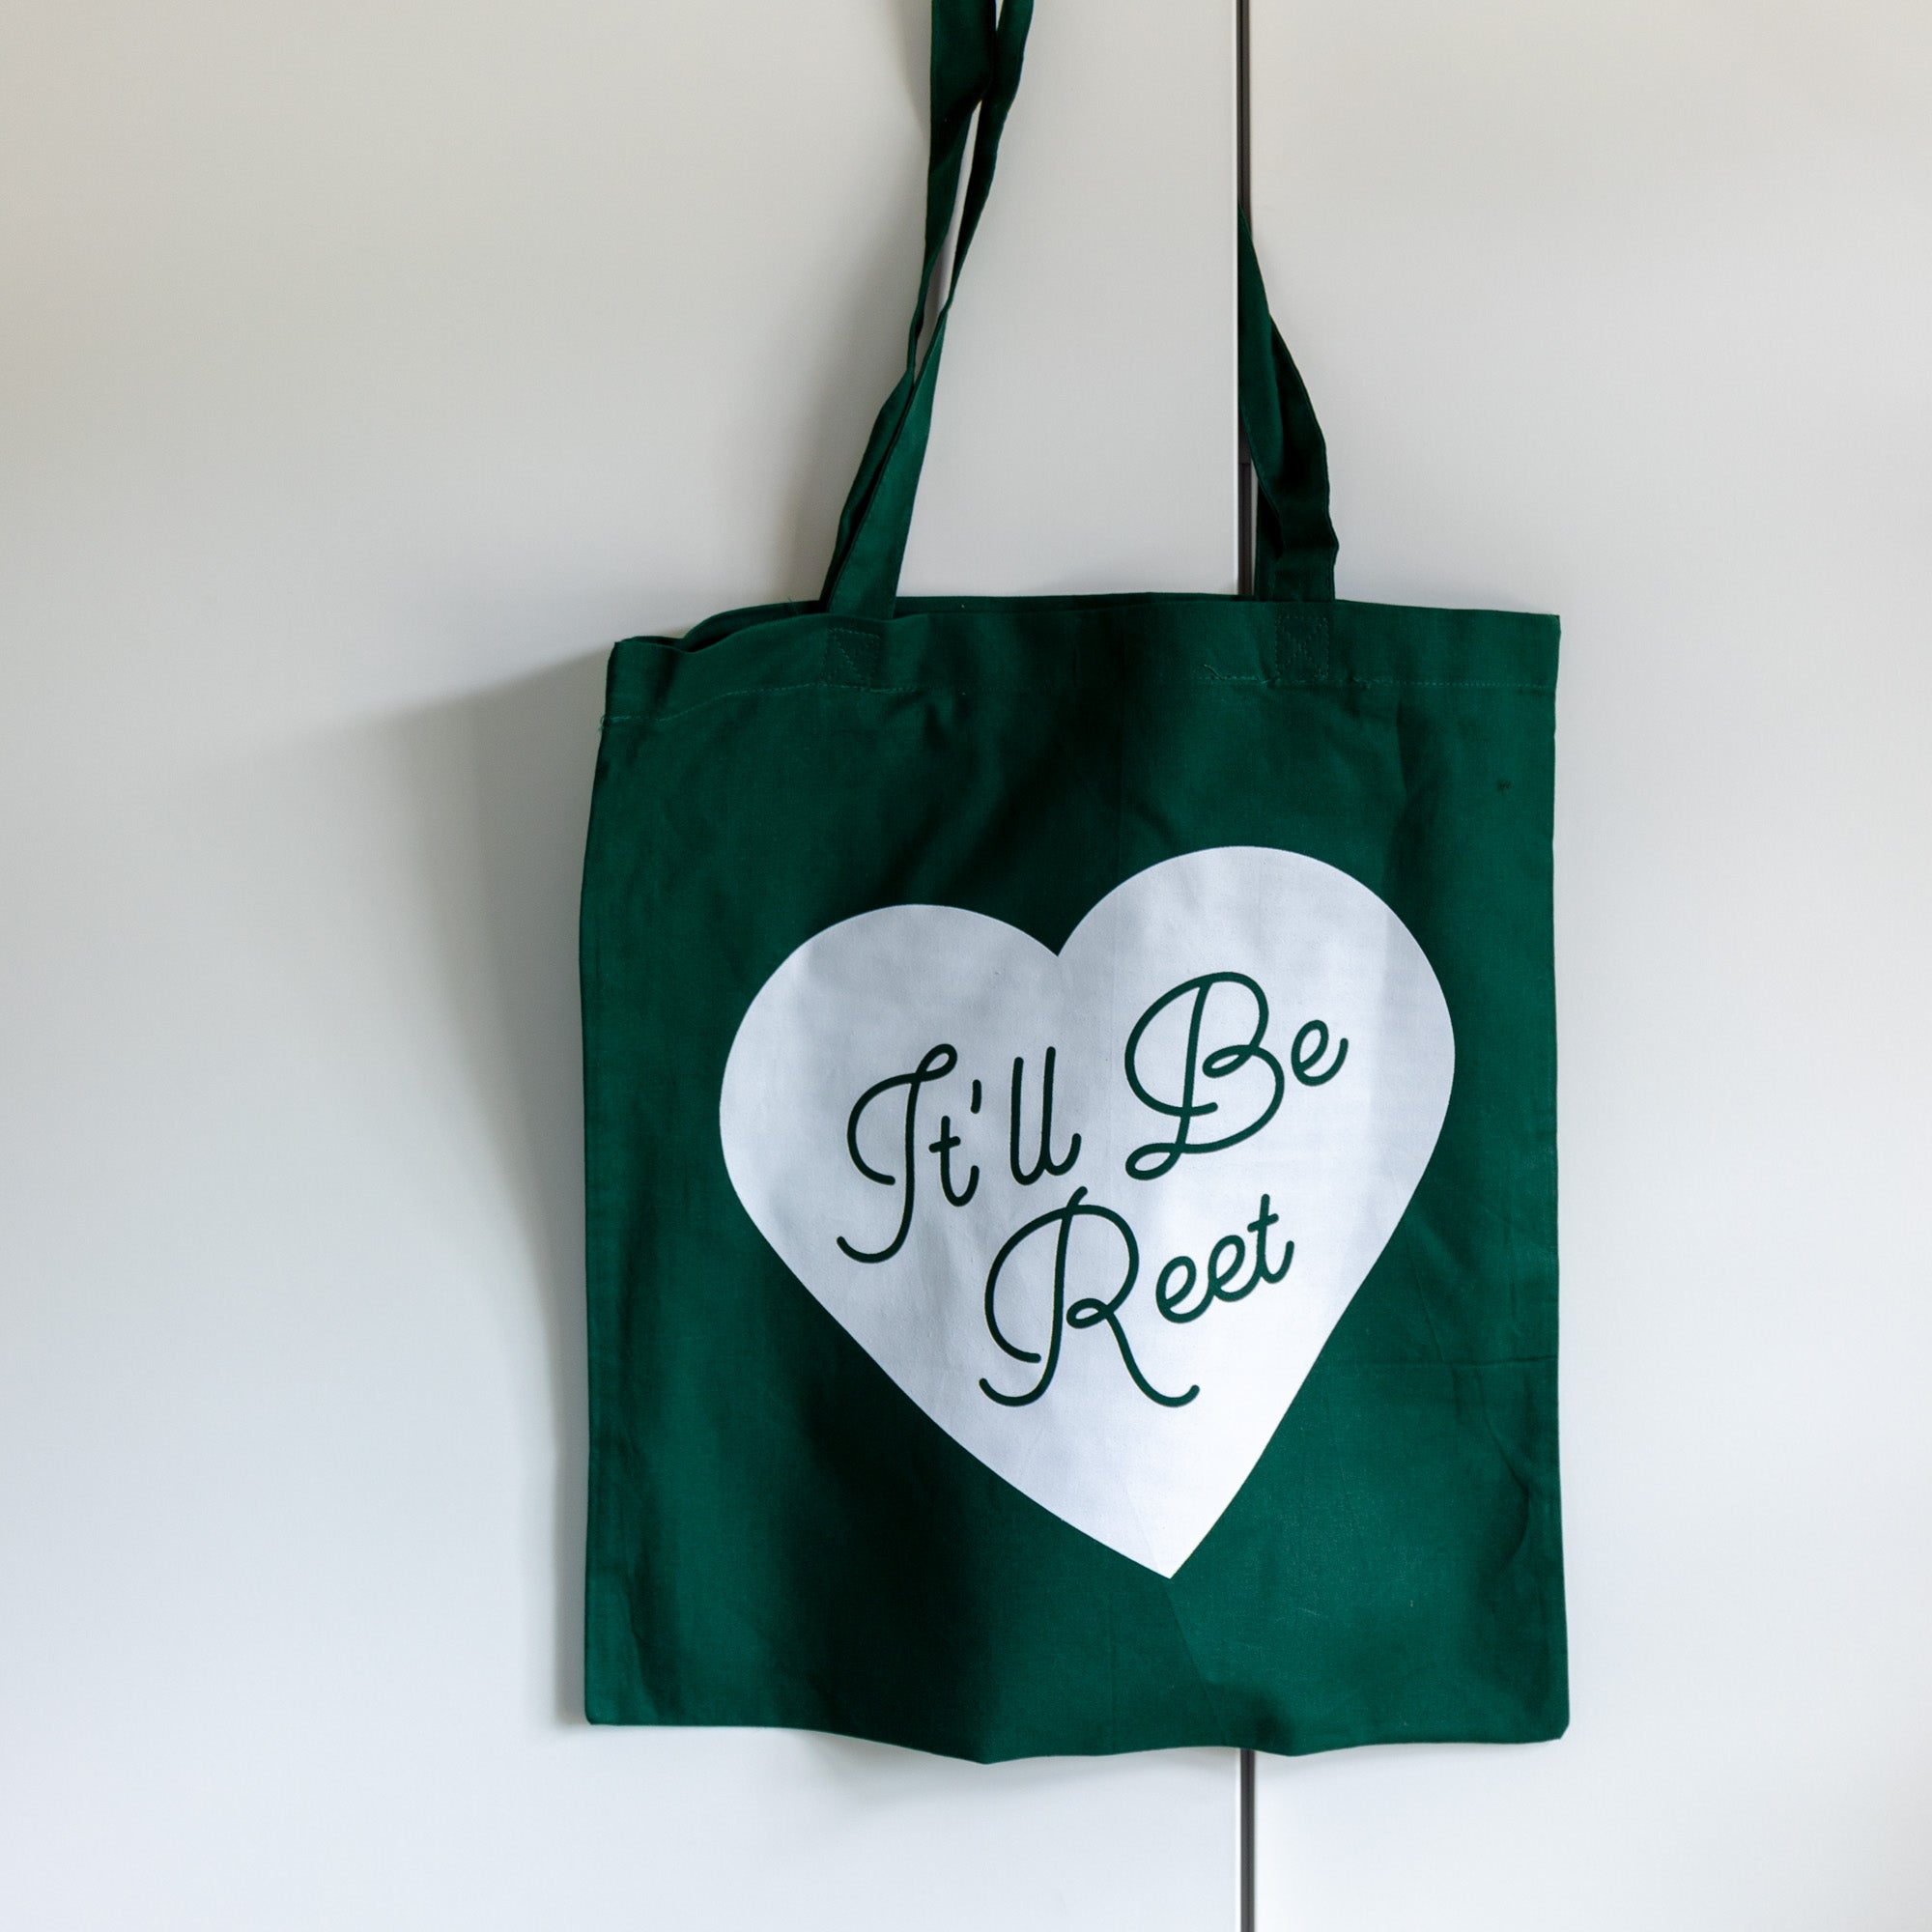 green tote shoulder bag with heart design and printed it'll be reet slogan in script font